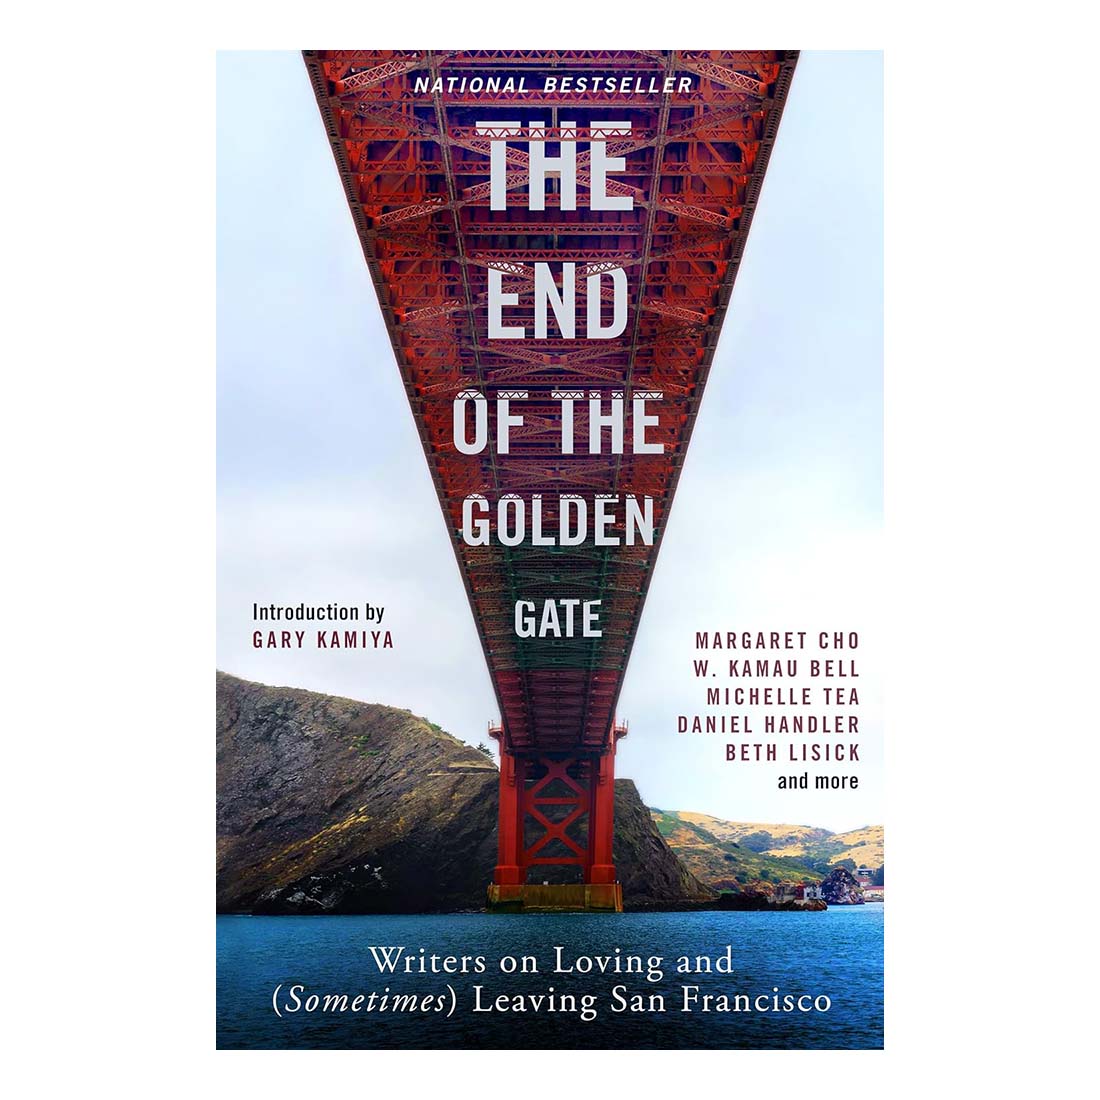 The End of the Golden Gate: Writers on Loving and (Sometimes) Leaving San Francisco